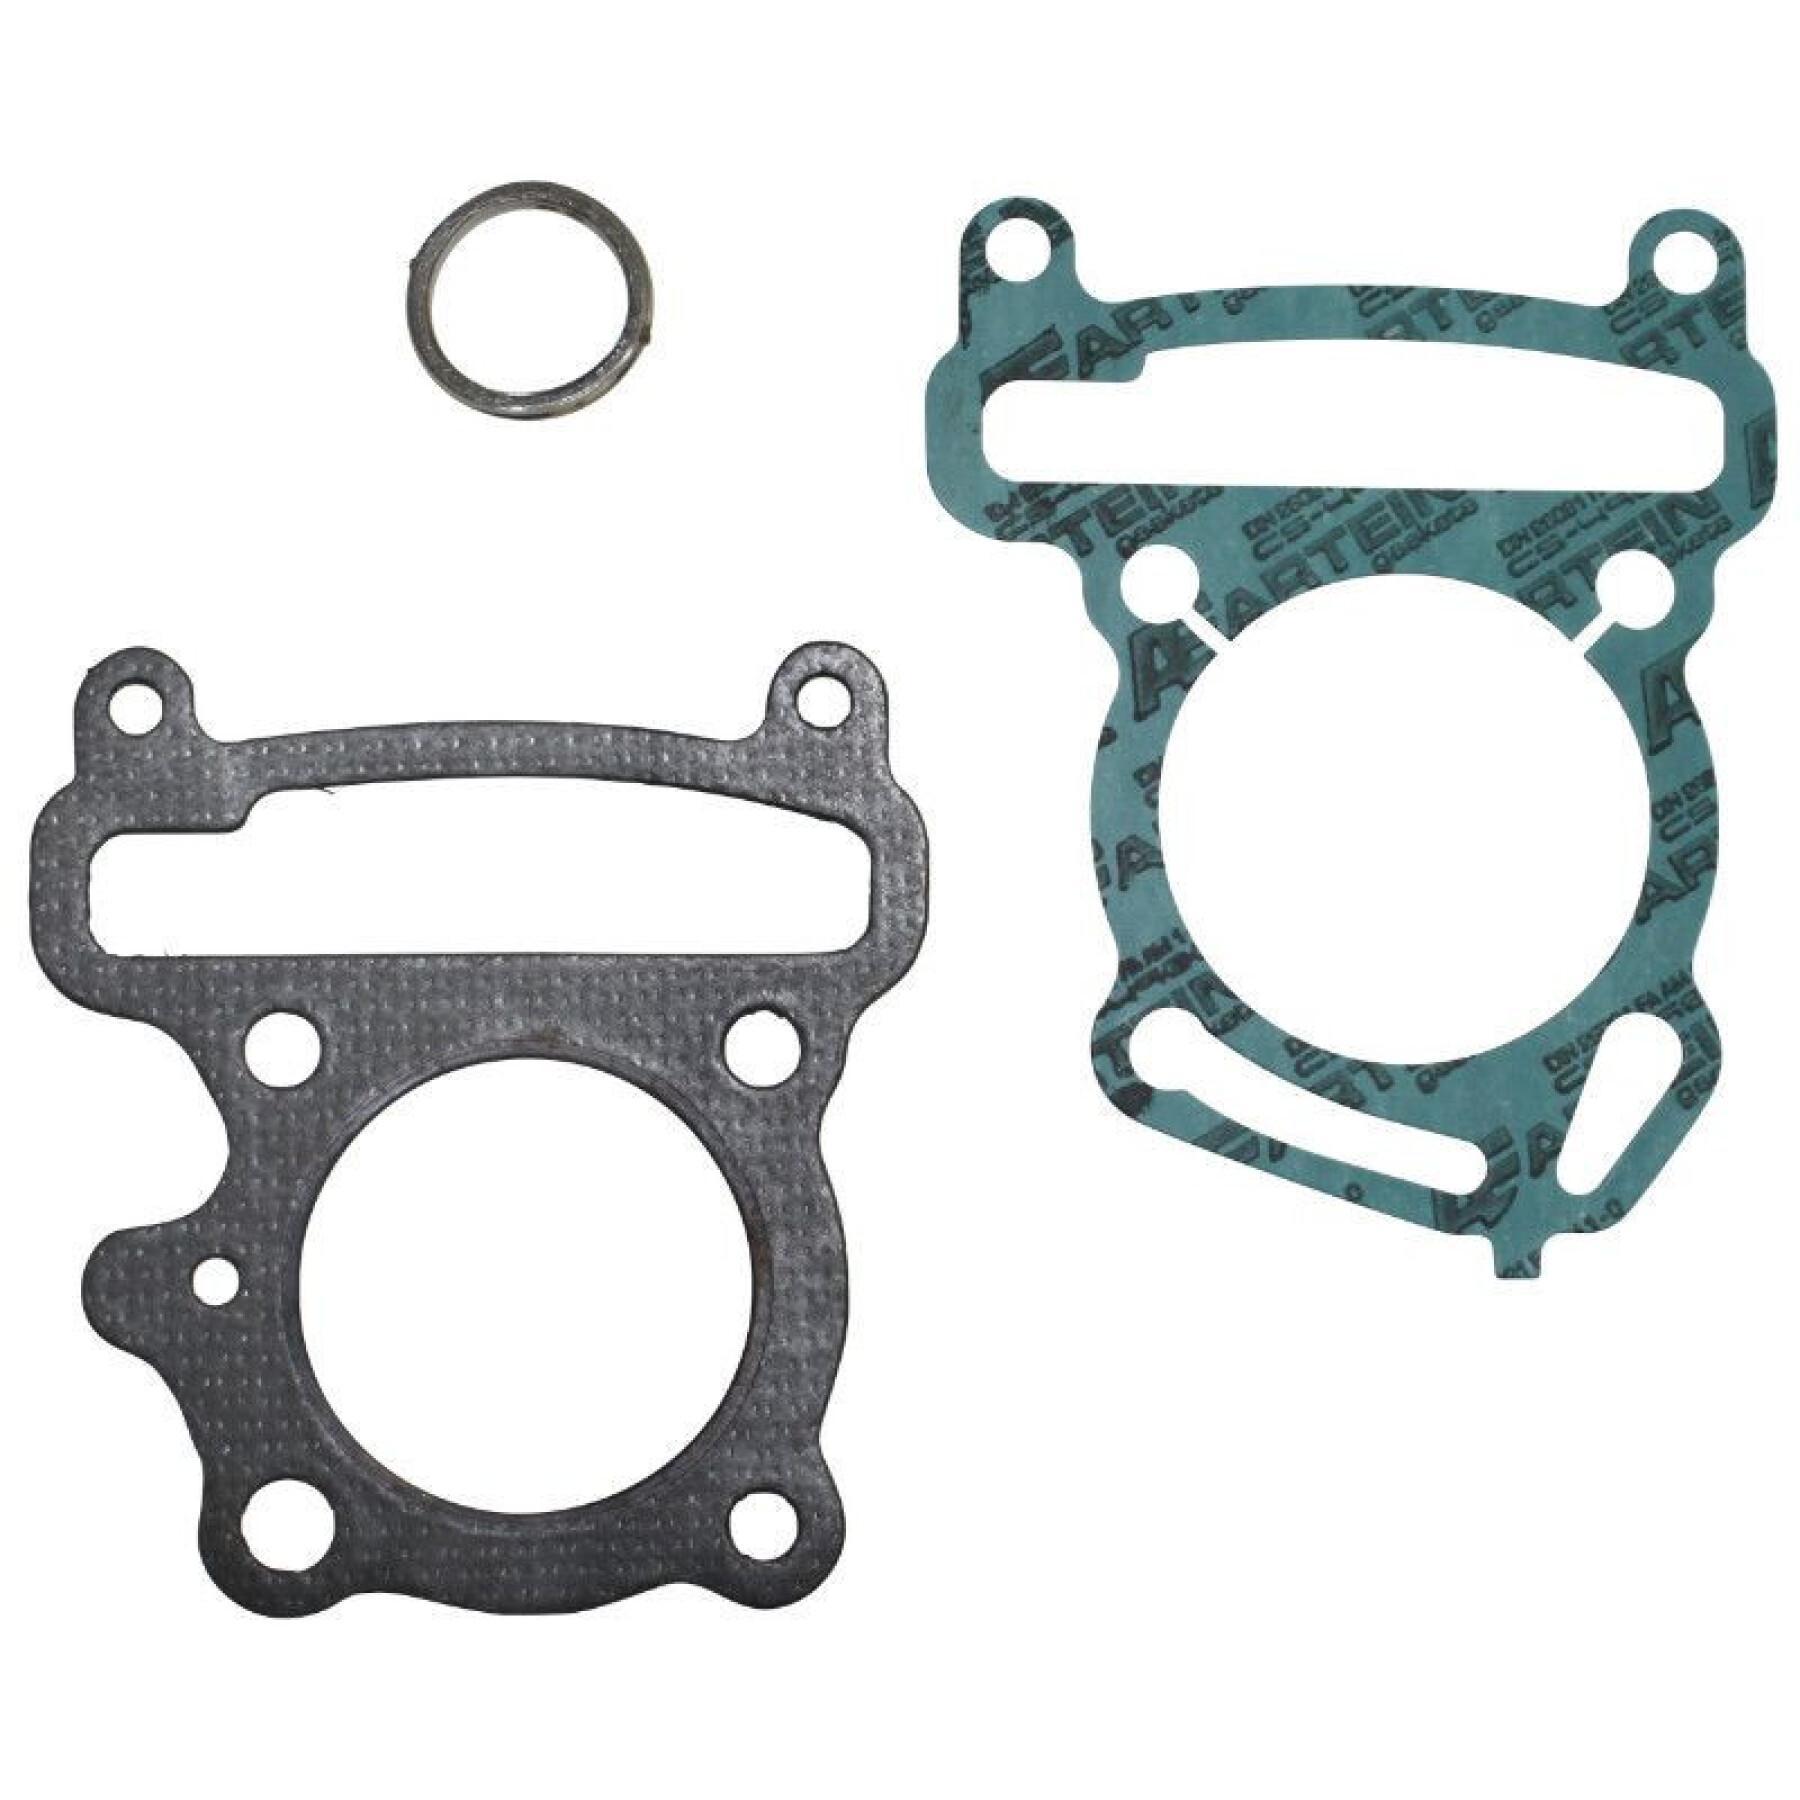 Top gasket for scooter engine Artein Daelim 125 Ns History S1 S2